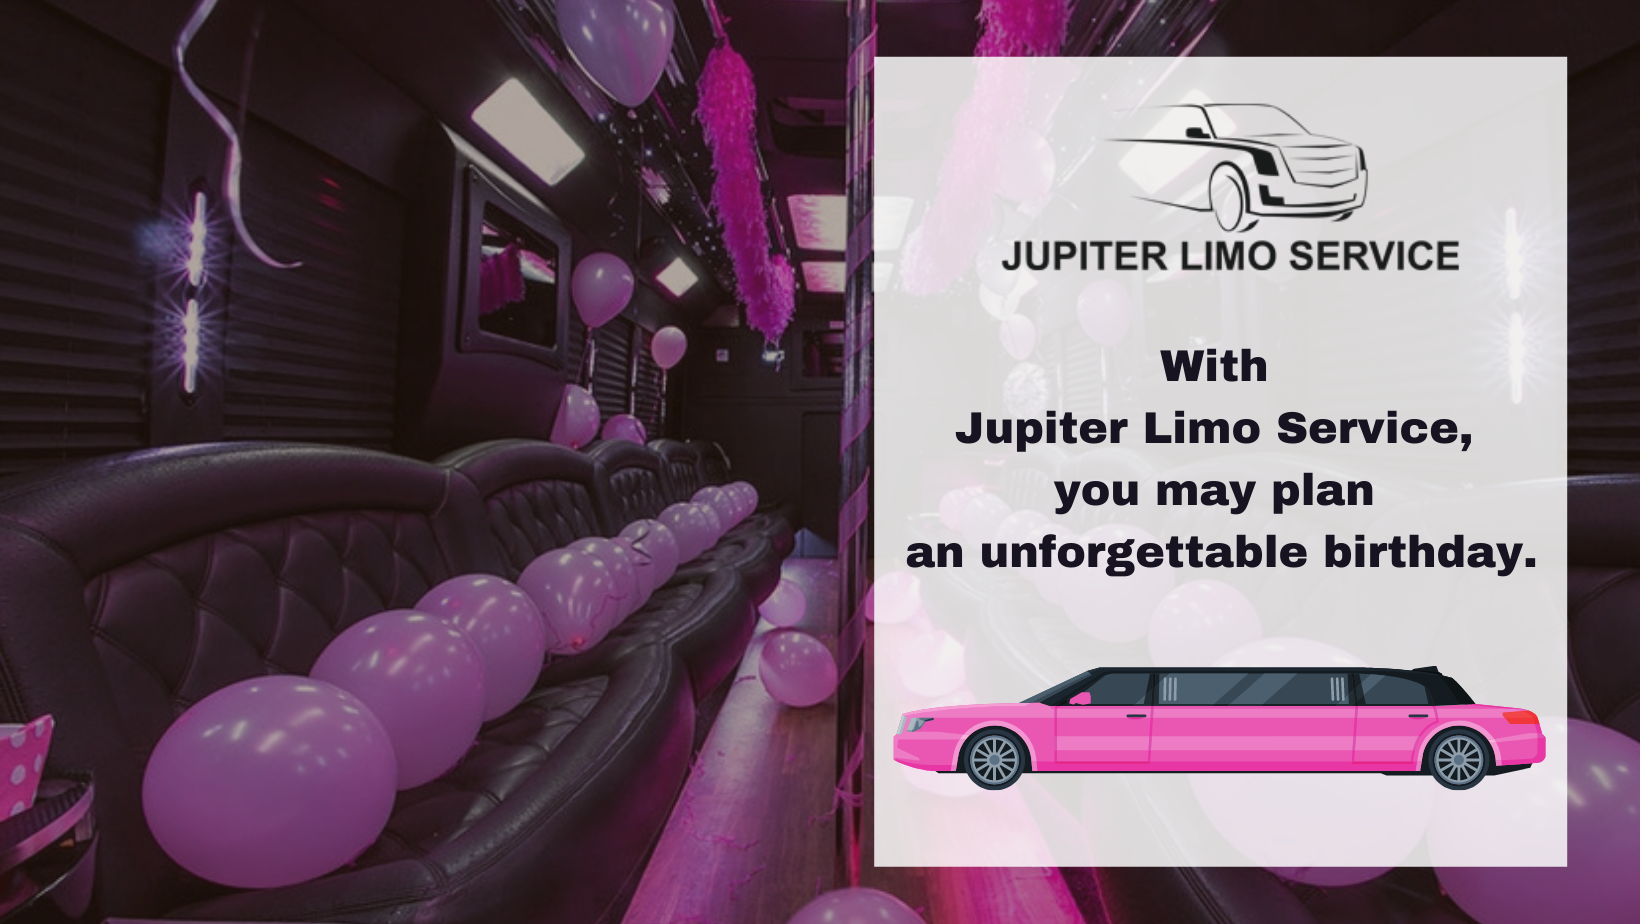 With Jupiter Limo Service, you may plan an unforgettable birthday.